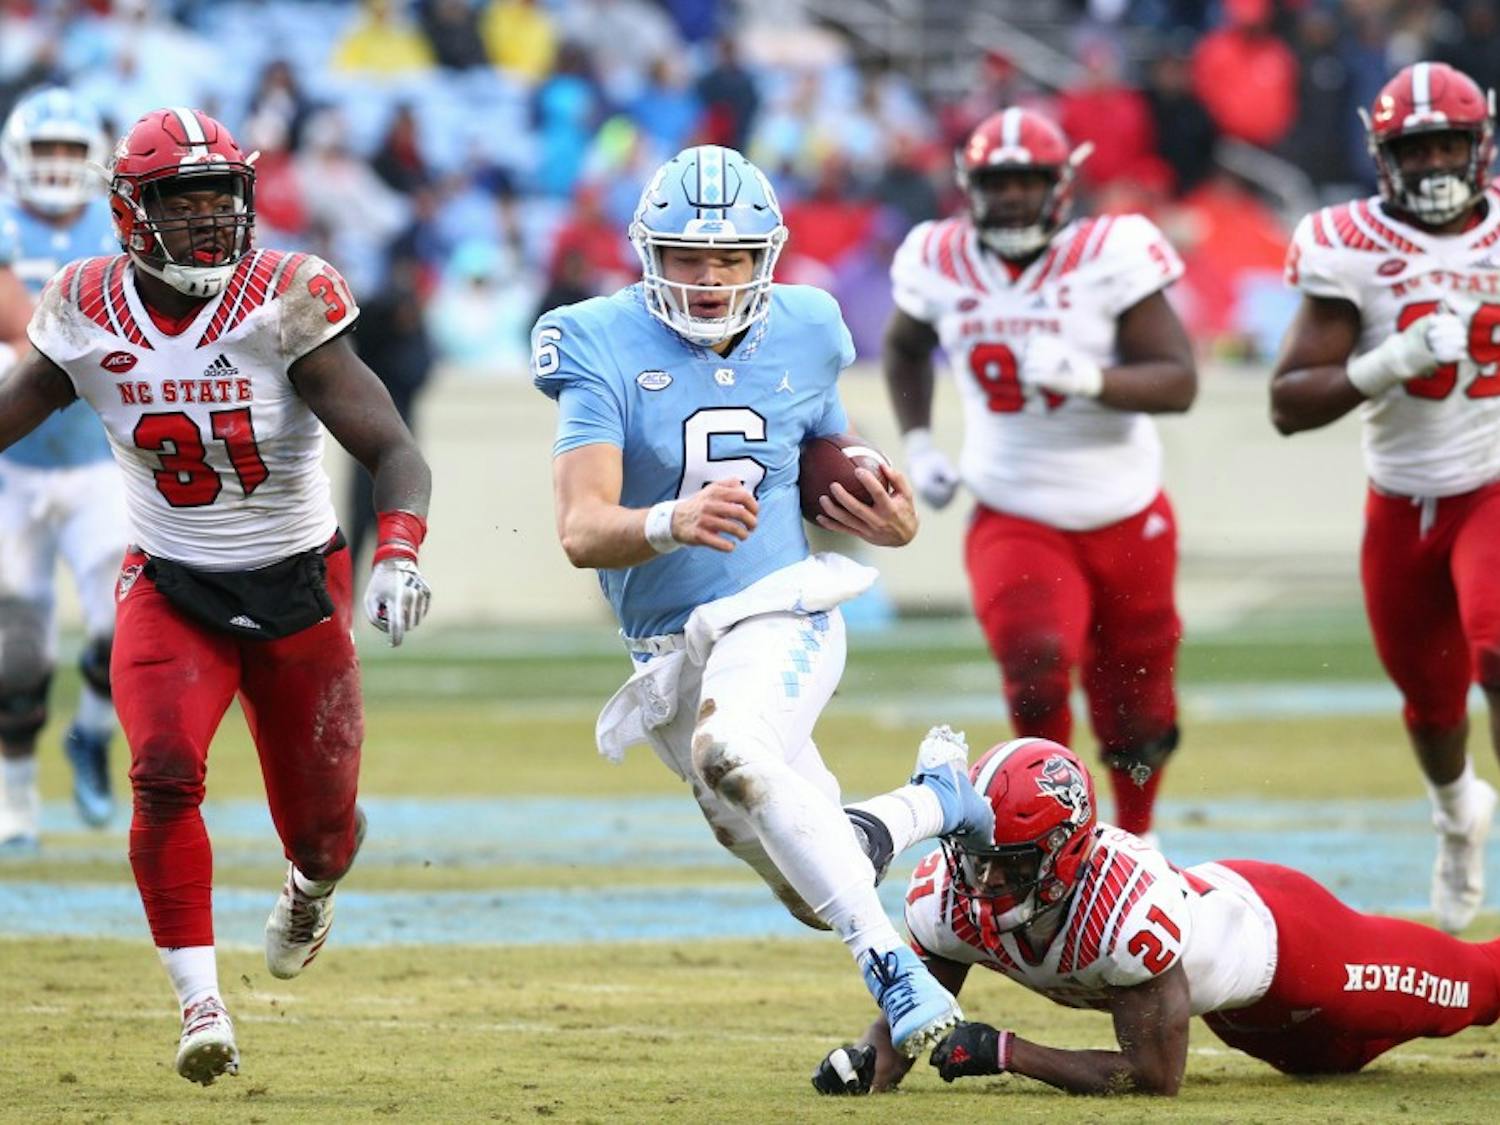 Cade Fortin unc football vs nc state